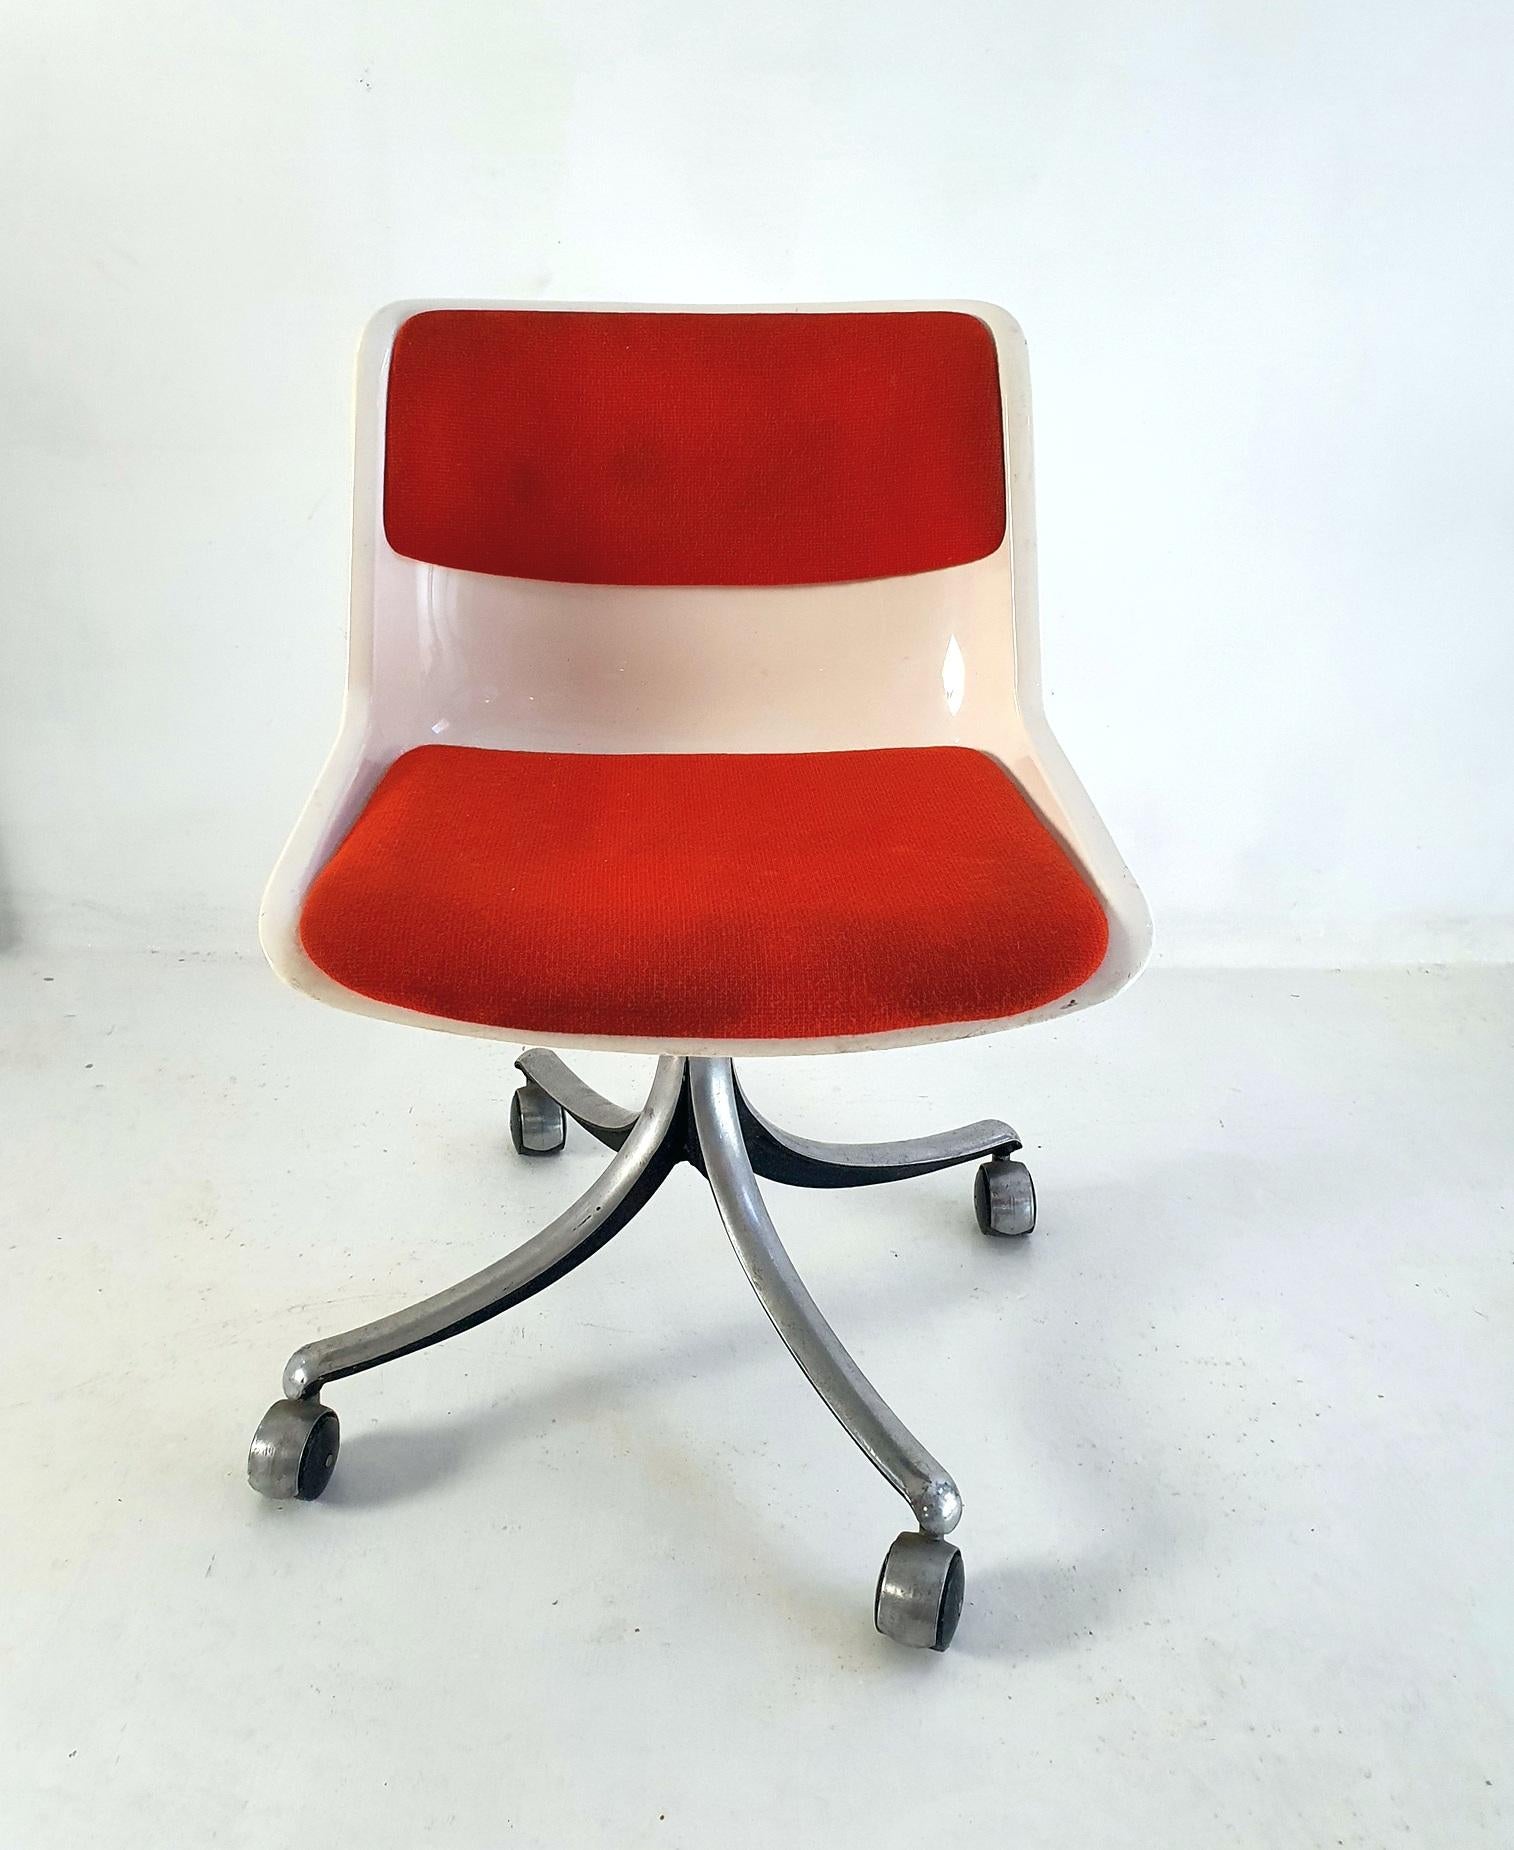 Off white plastic office swivel chair with orange/red wool fabric resting on an aluminium base with the original castors which functions well. Designed by Osvaldo Borsani for Tecno in 1970's. This model is fixed in height. 
Shown with original